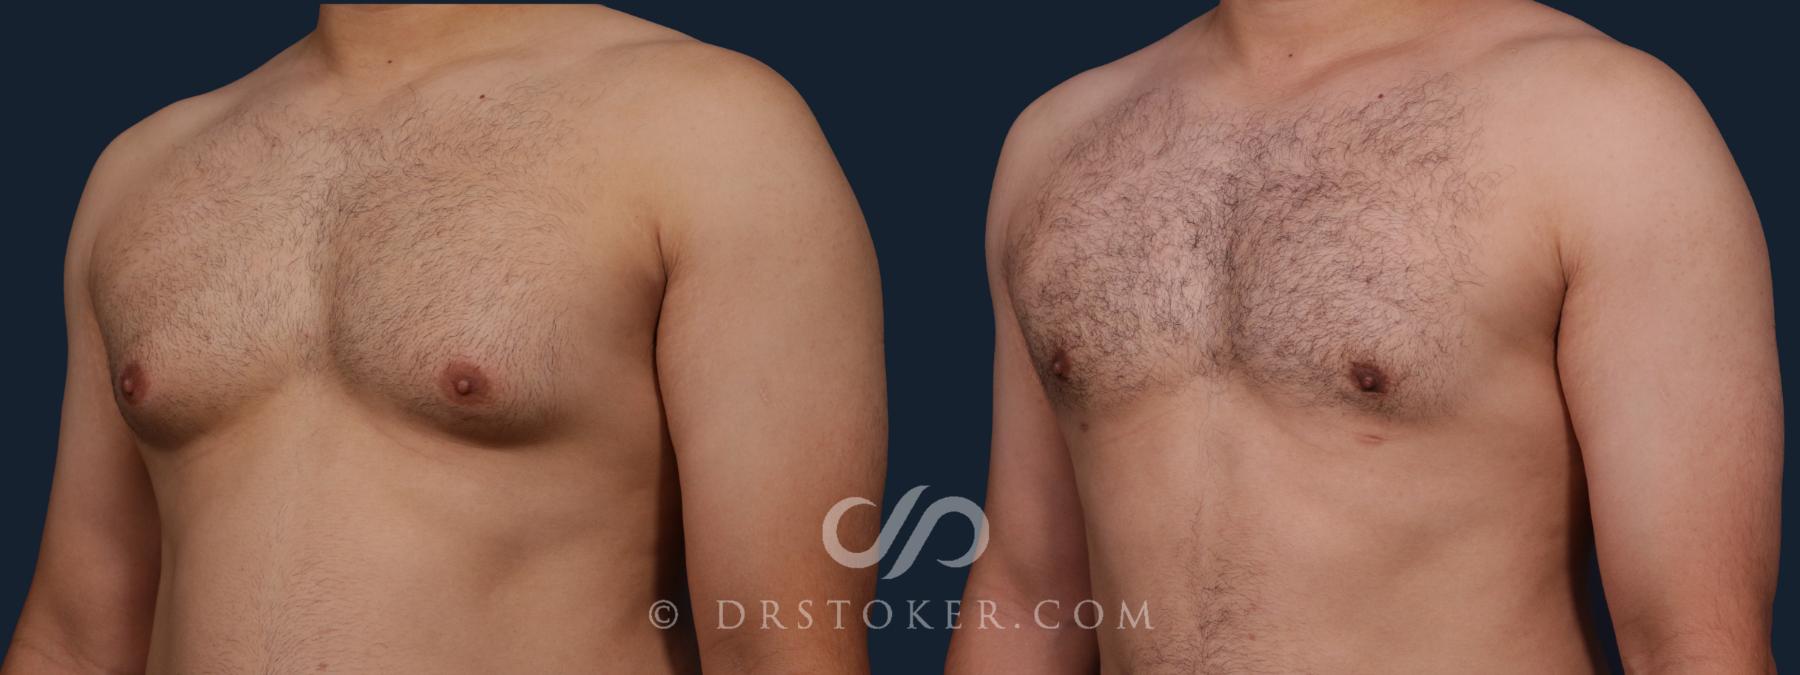 Before & After Breast Reduction for Men (Gynecomastia) Case 2177 Left Oblique View in Los Angeles, CA